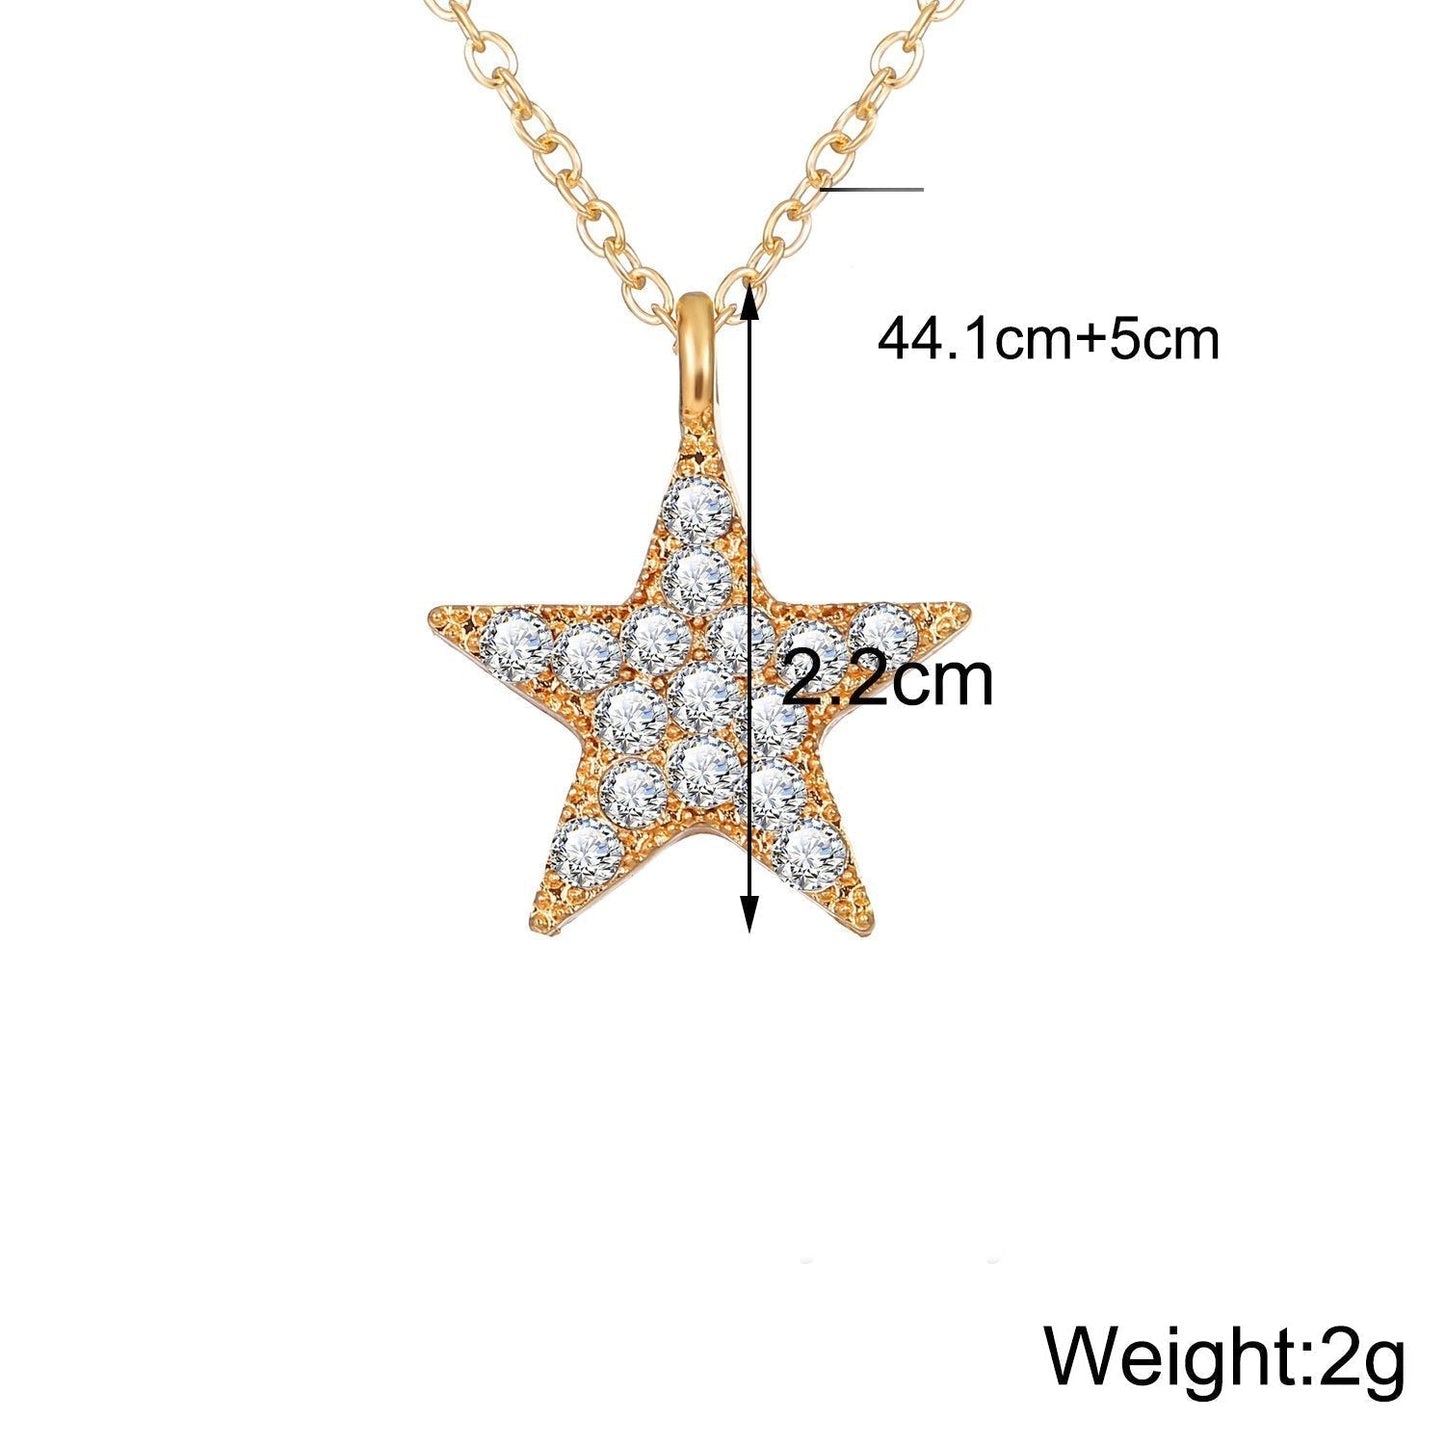 3 Piece Celestial Pave Necklace With  Crystals 18K Gold Plated Necklace ITALY Design Elsy Style Necklace